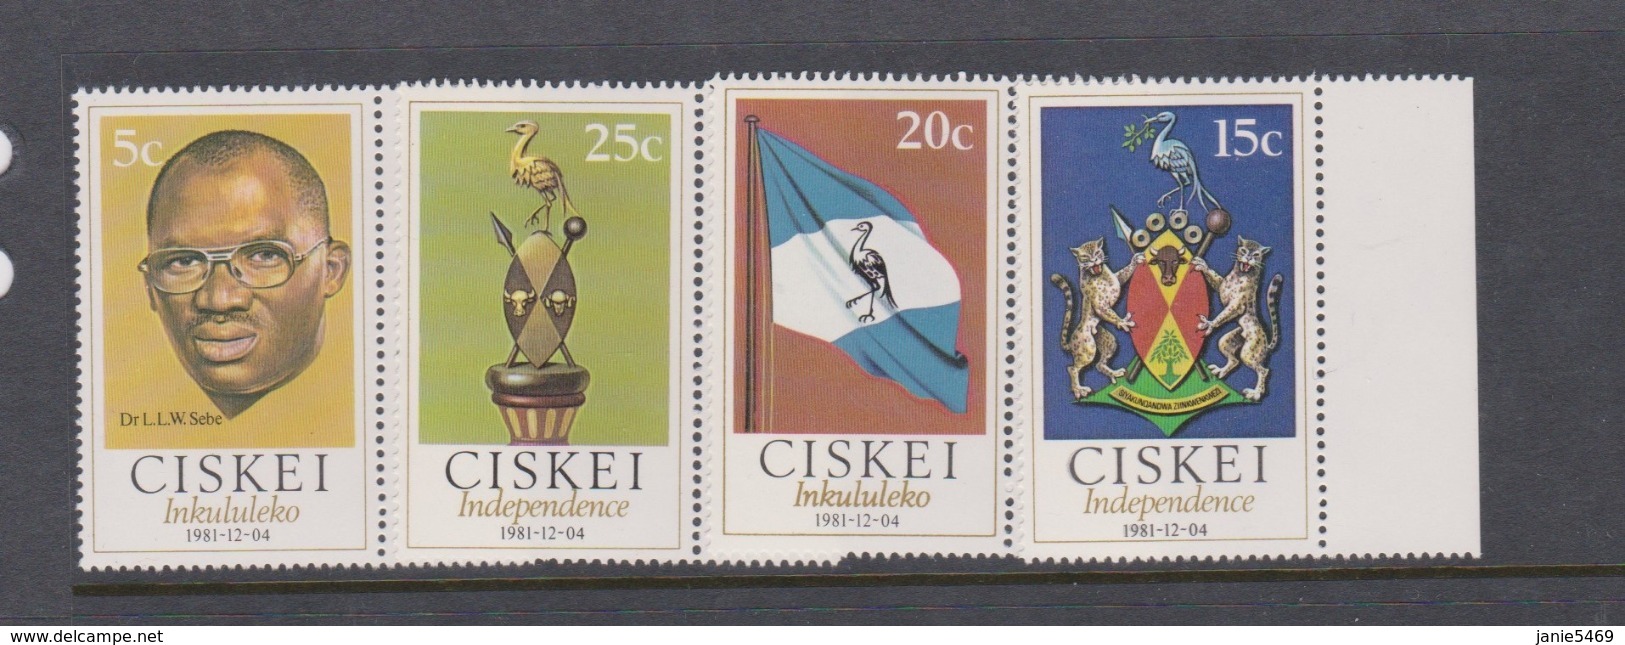 South Africa-Ciskei Scott 1-4 1981 Independence,Mint Never Hinged - Ciskei